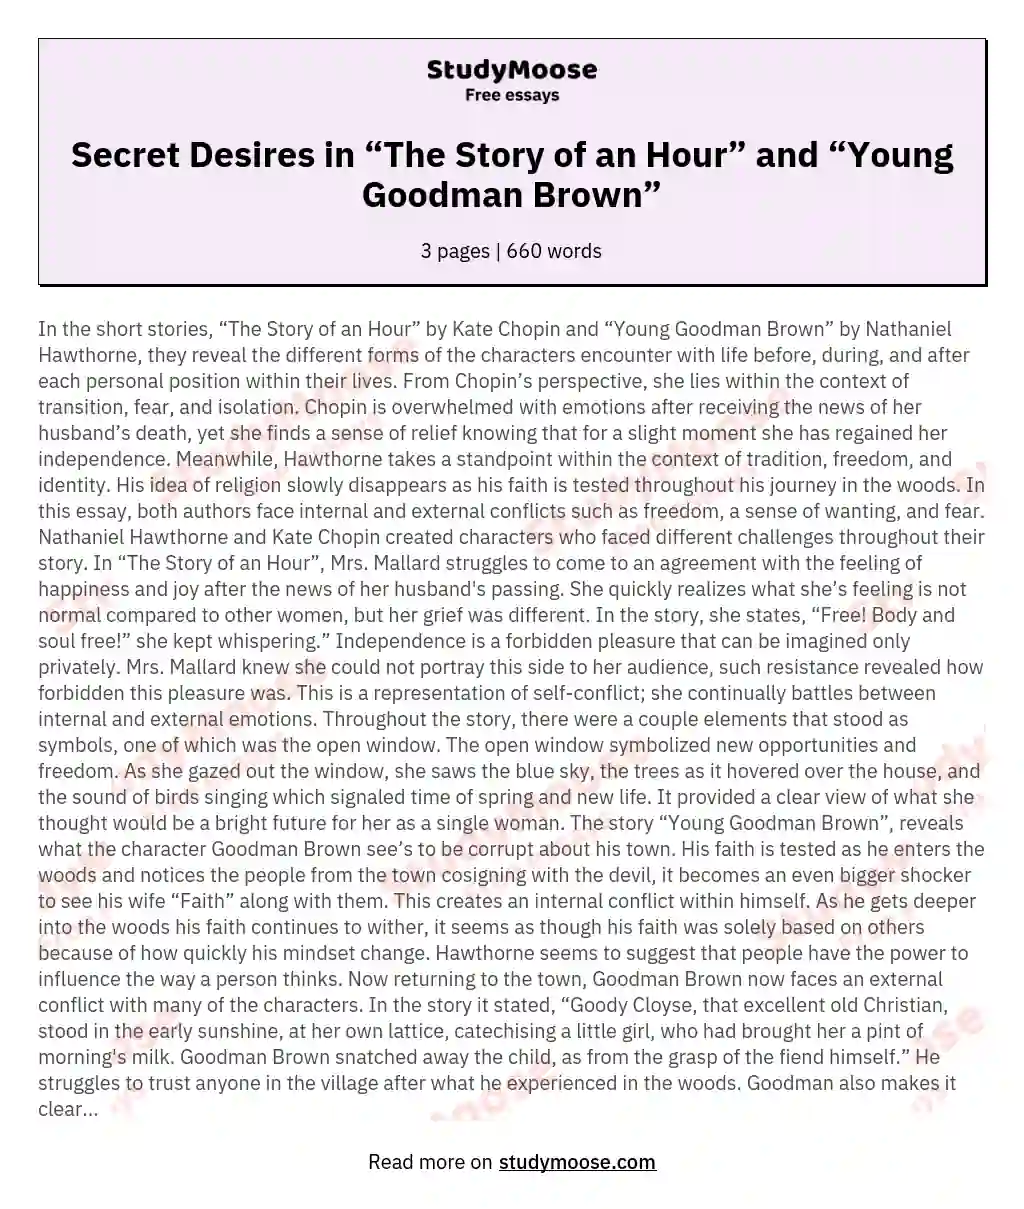 Secret Desires in “The Story of an Hour” and “Young Goodman Brown”